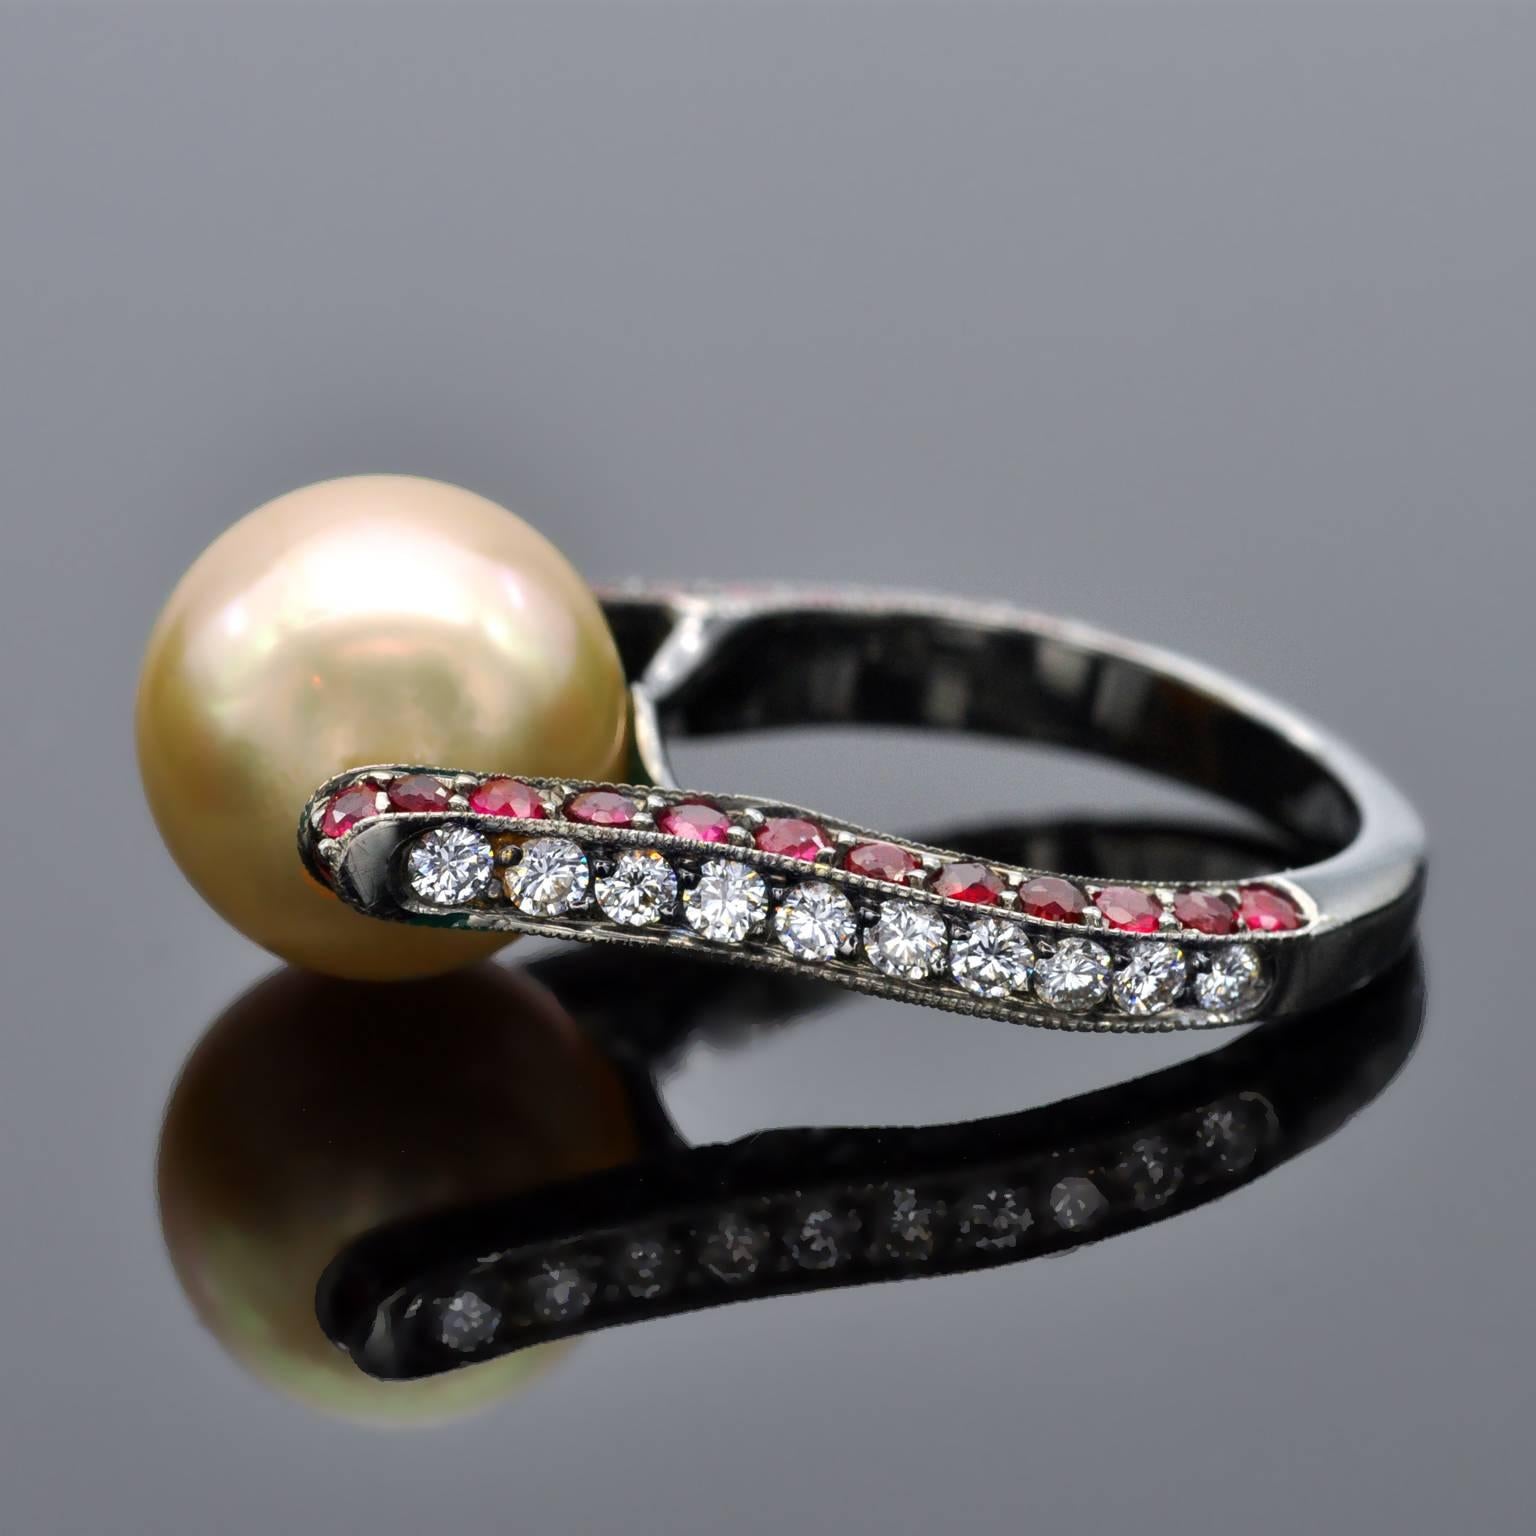 Unique modernist ring. It is a lyra shaped ring in blackened 18 KT gold holding a Golden south-sea pearl. On the shaft round rubies and diamonds are set.
Deatails
South sea Pearl 11.5-12 mm
Rubies: 1.70 carat
Diamonds: 0.51 carat